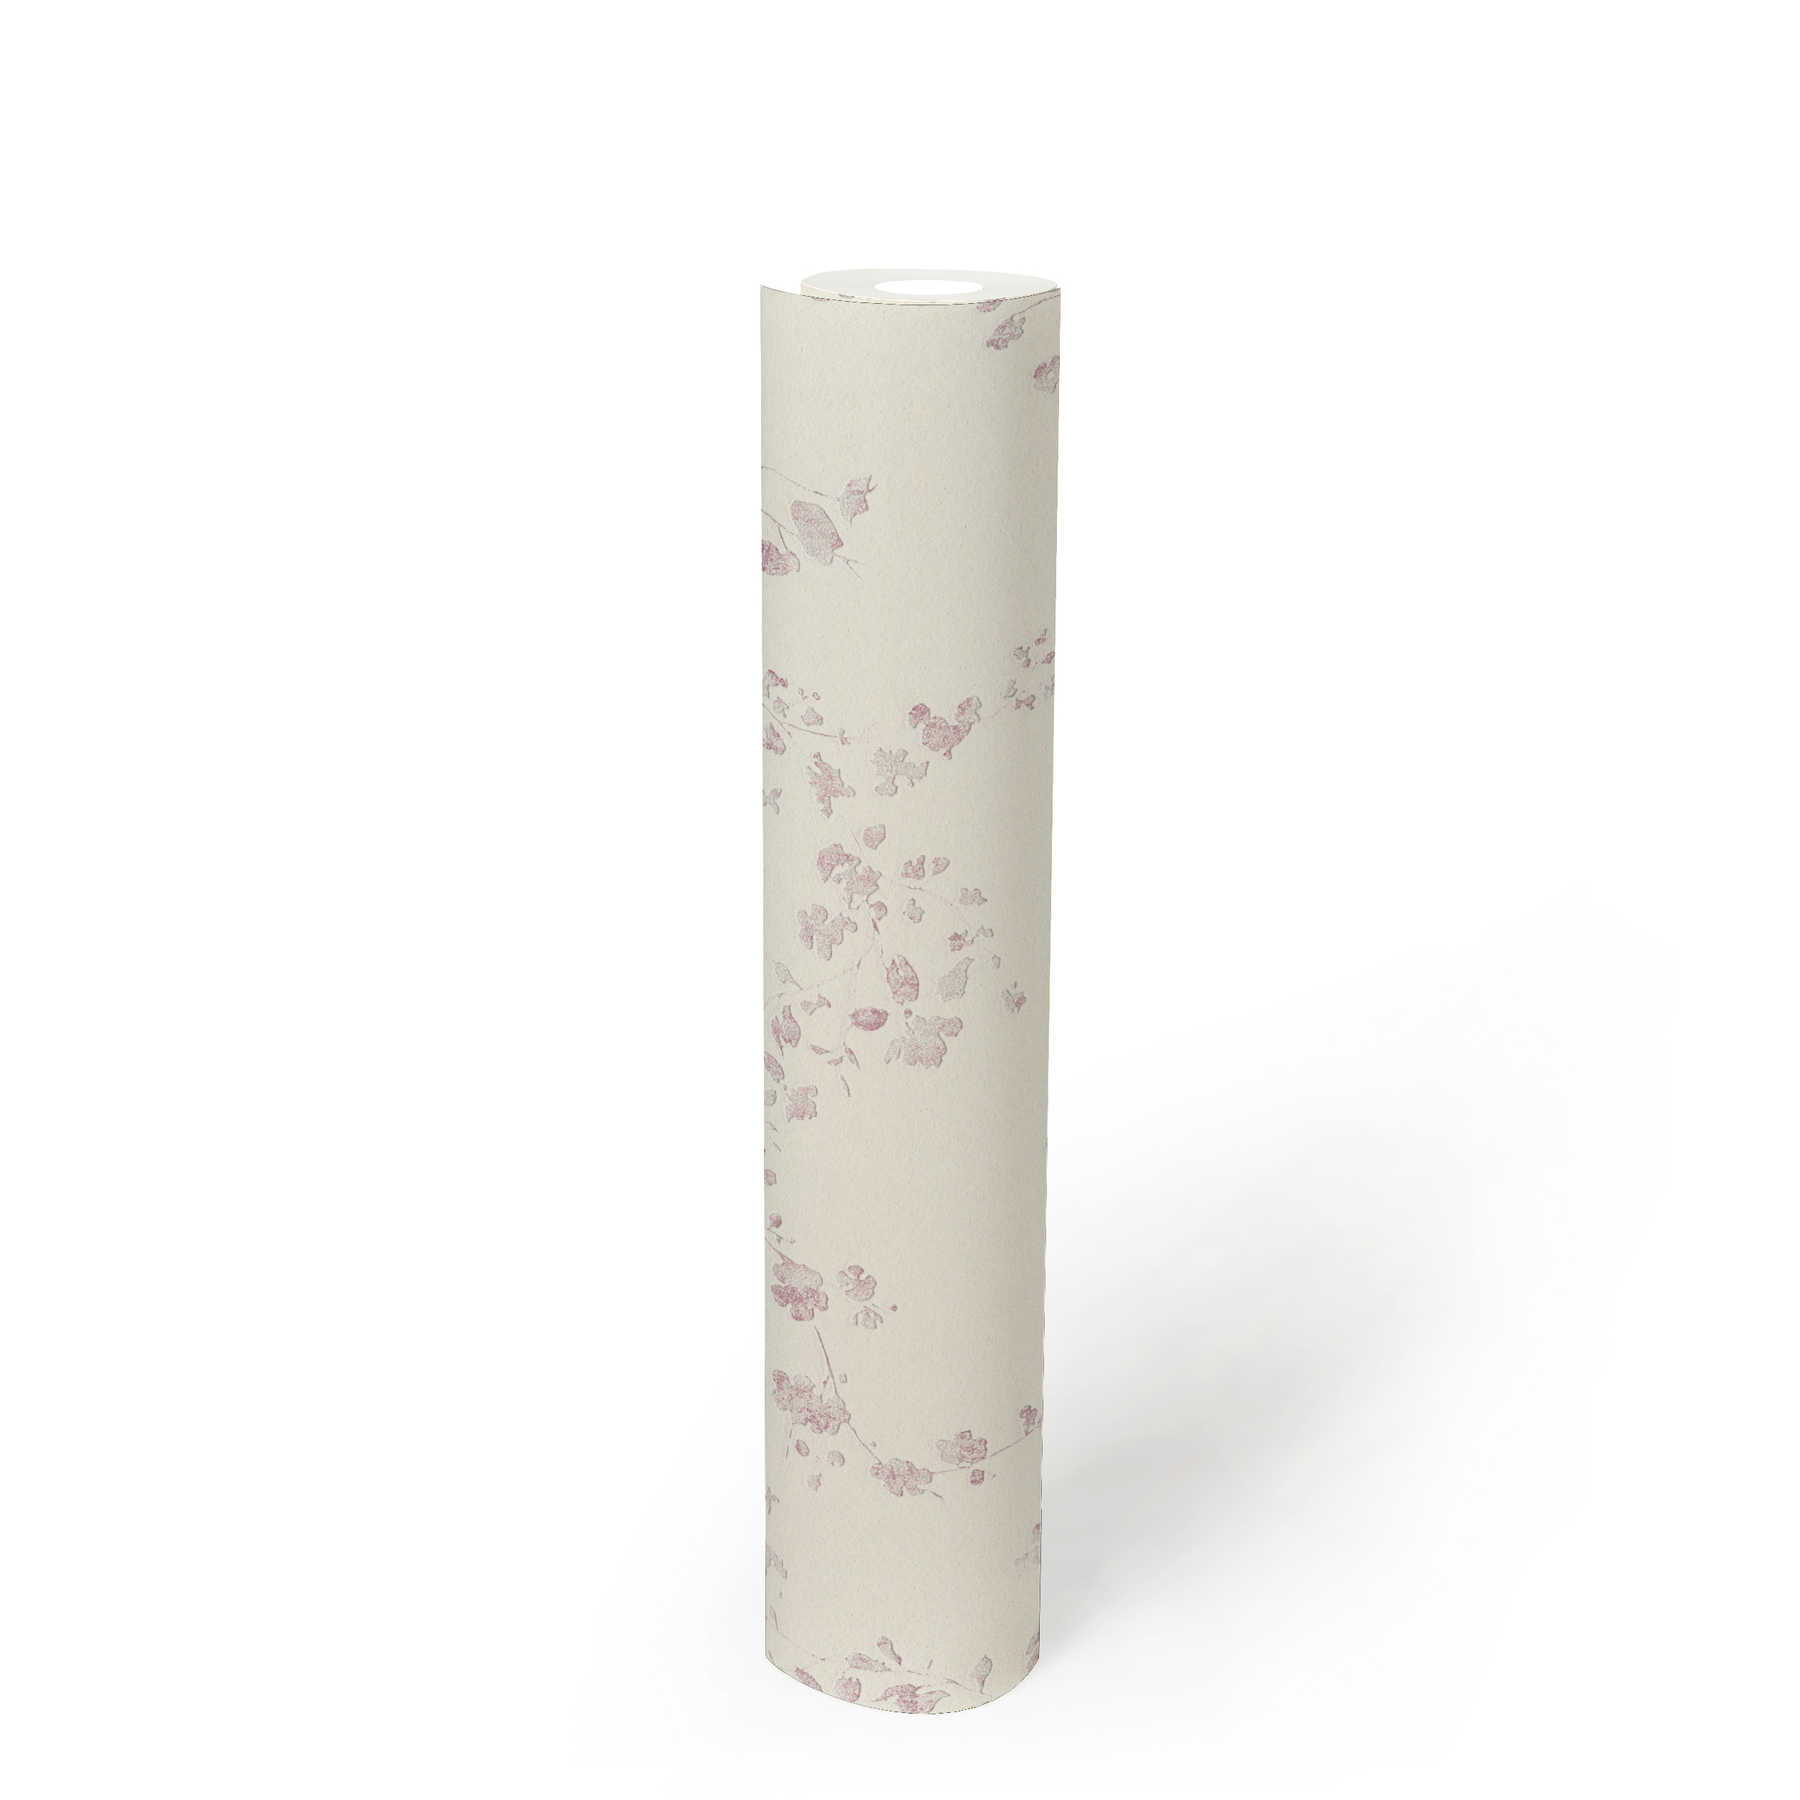             Flowers non-woven wallpaper in country style - purple, cream
        